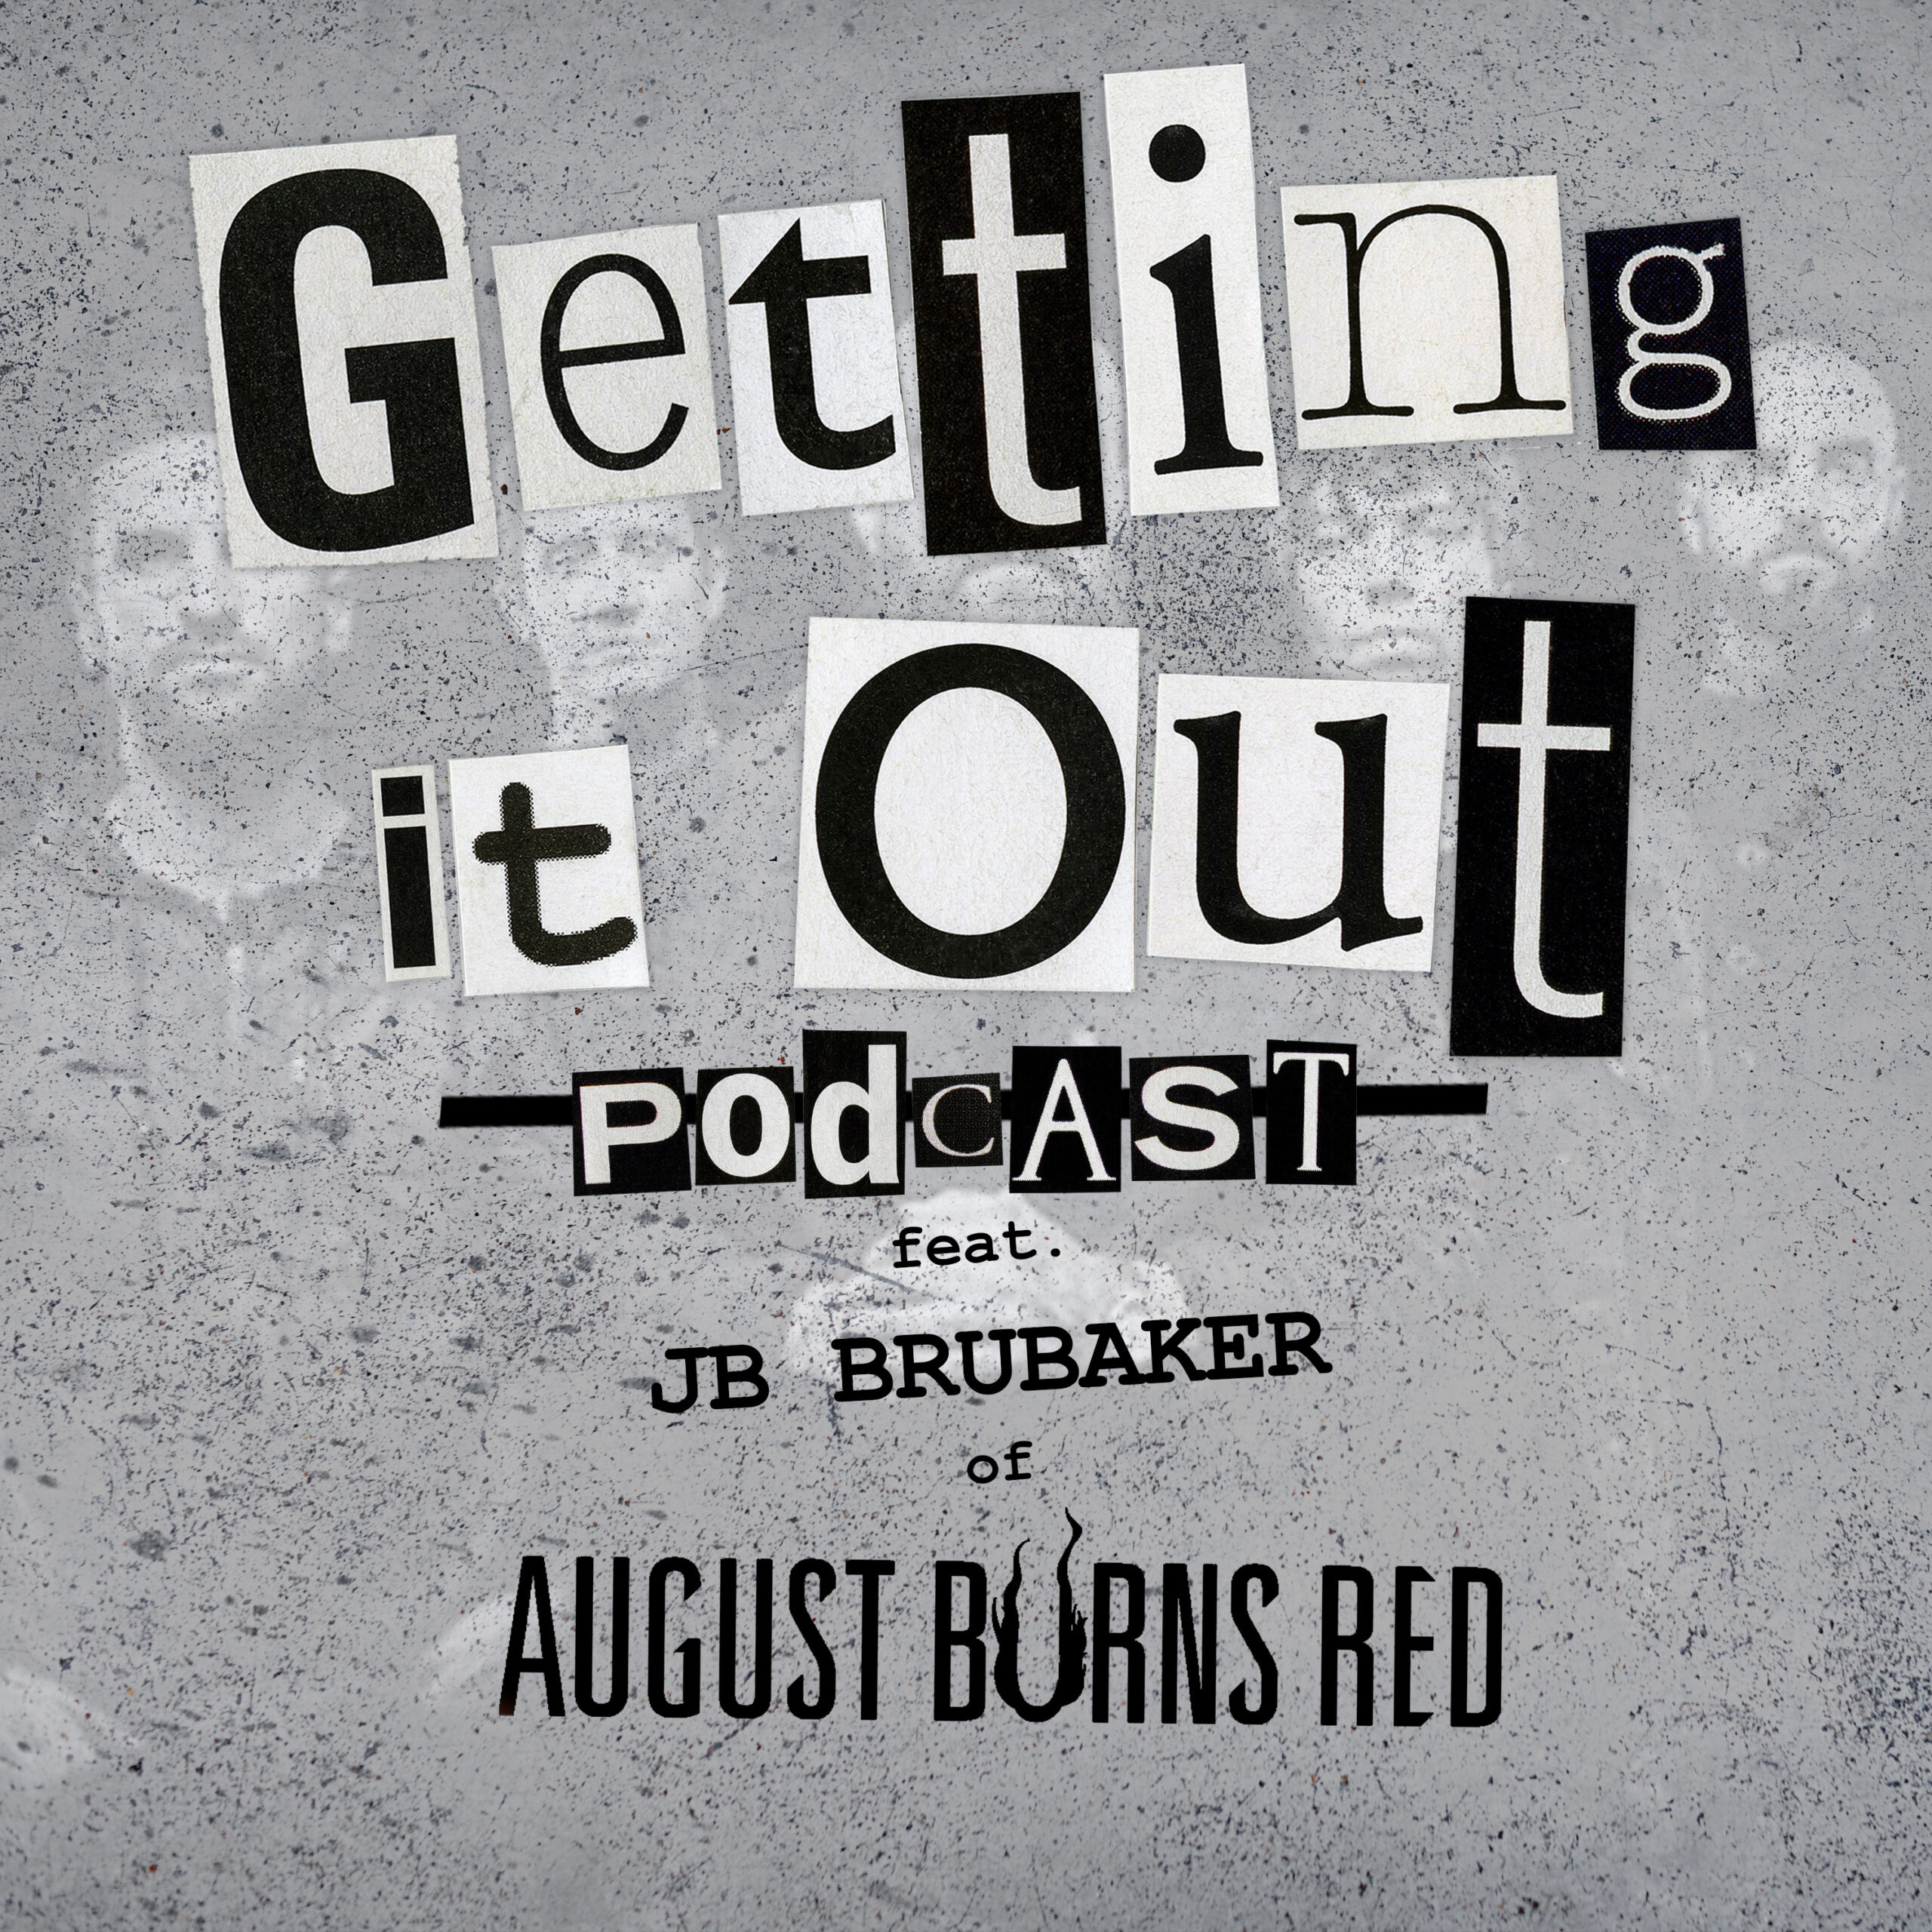 Episode 287 (August Burns Red)